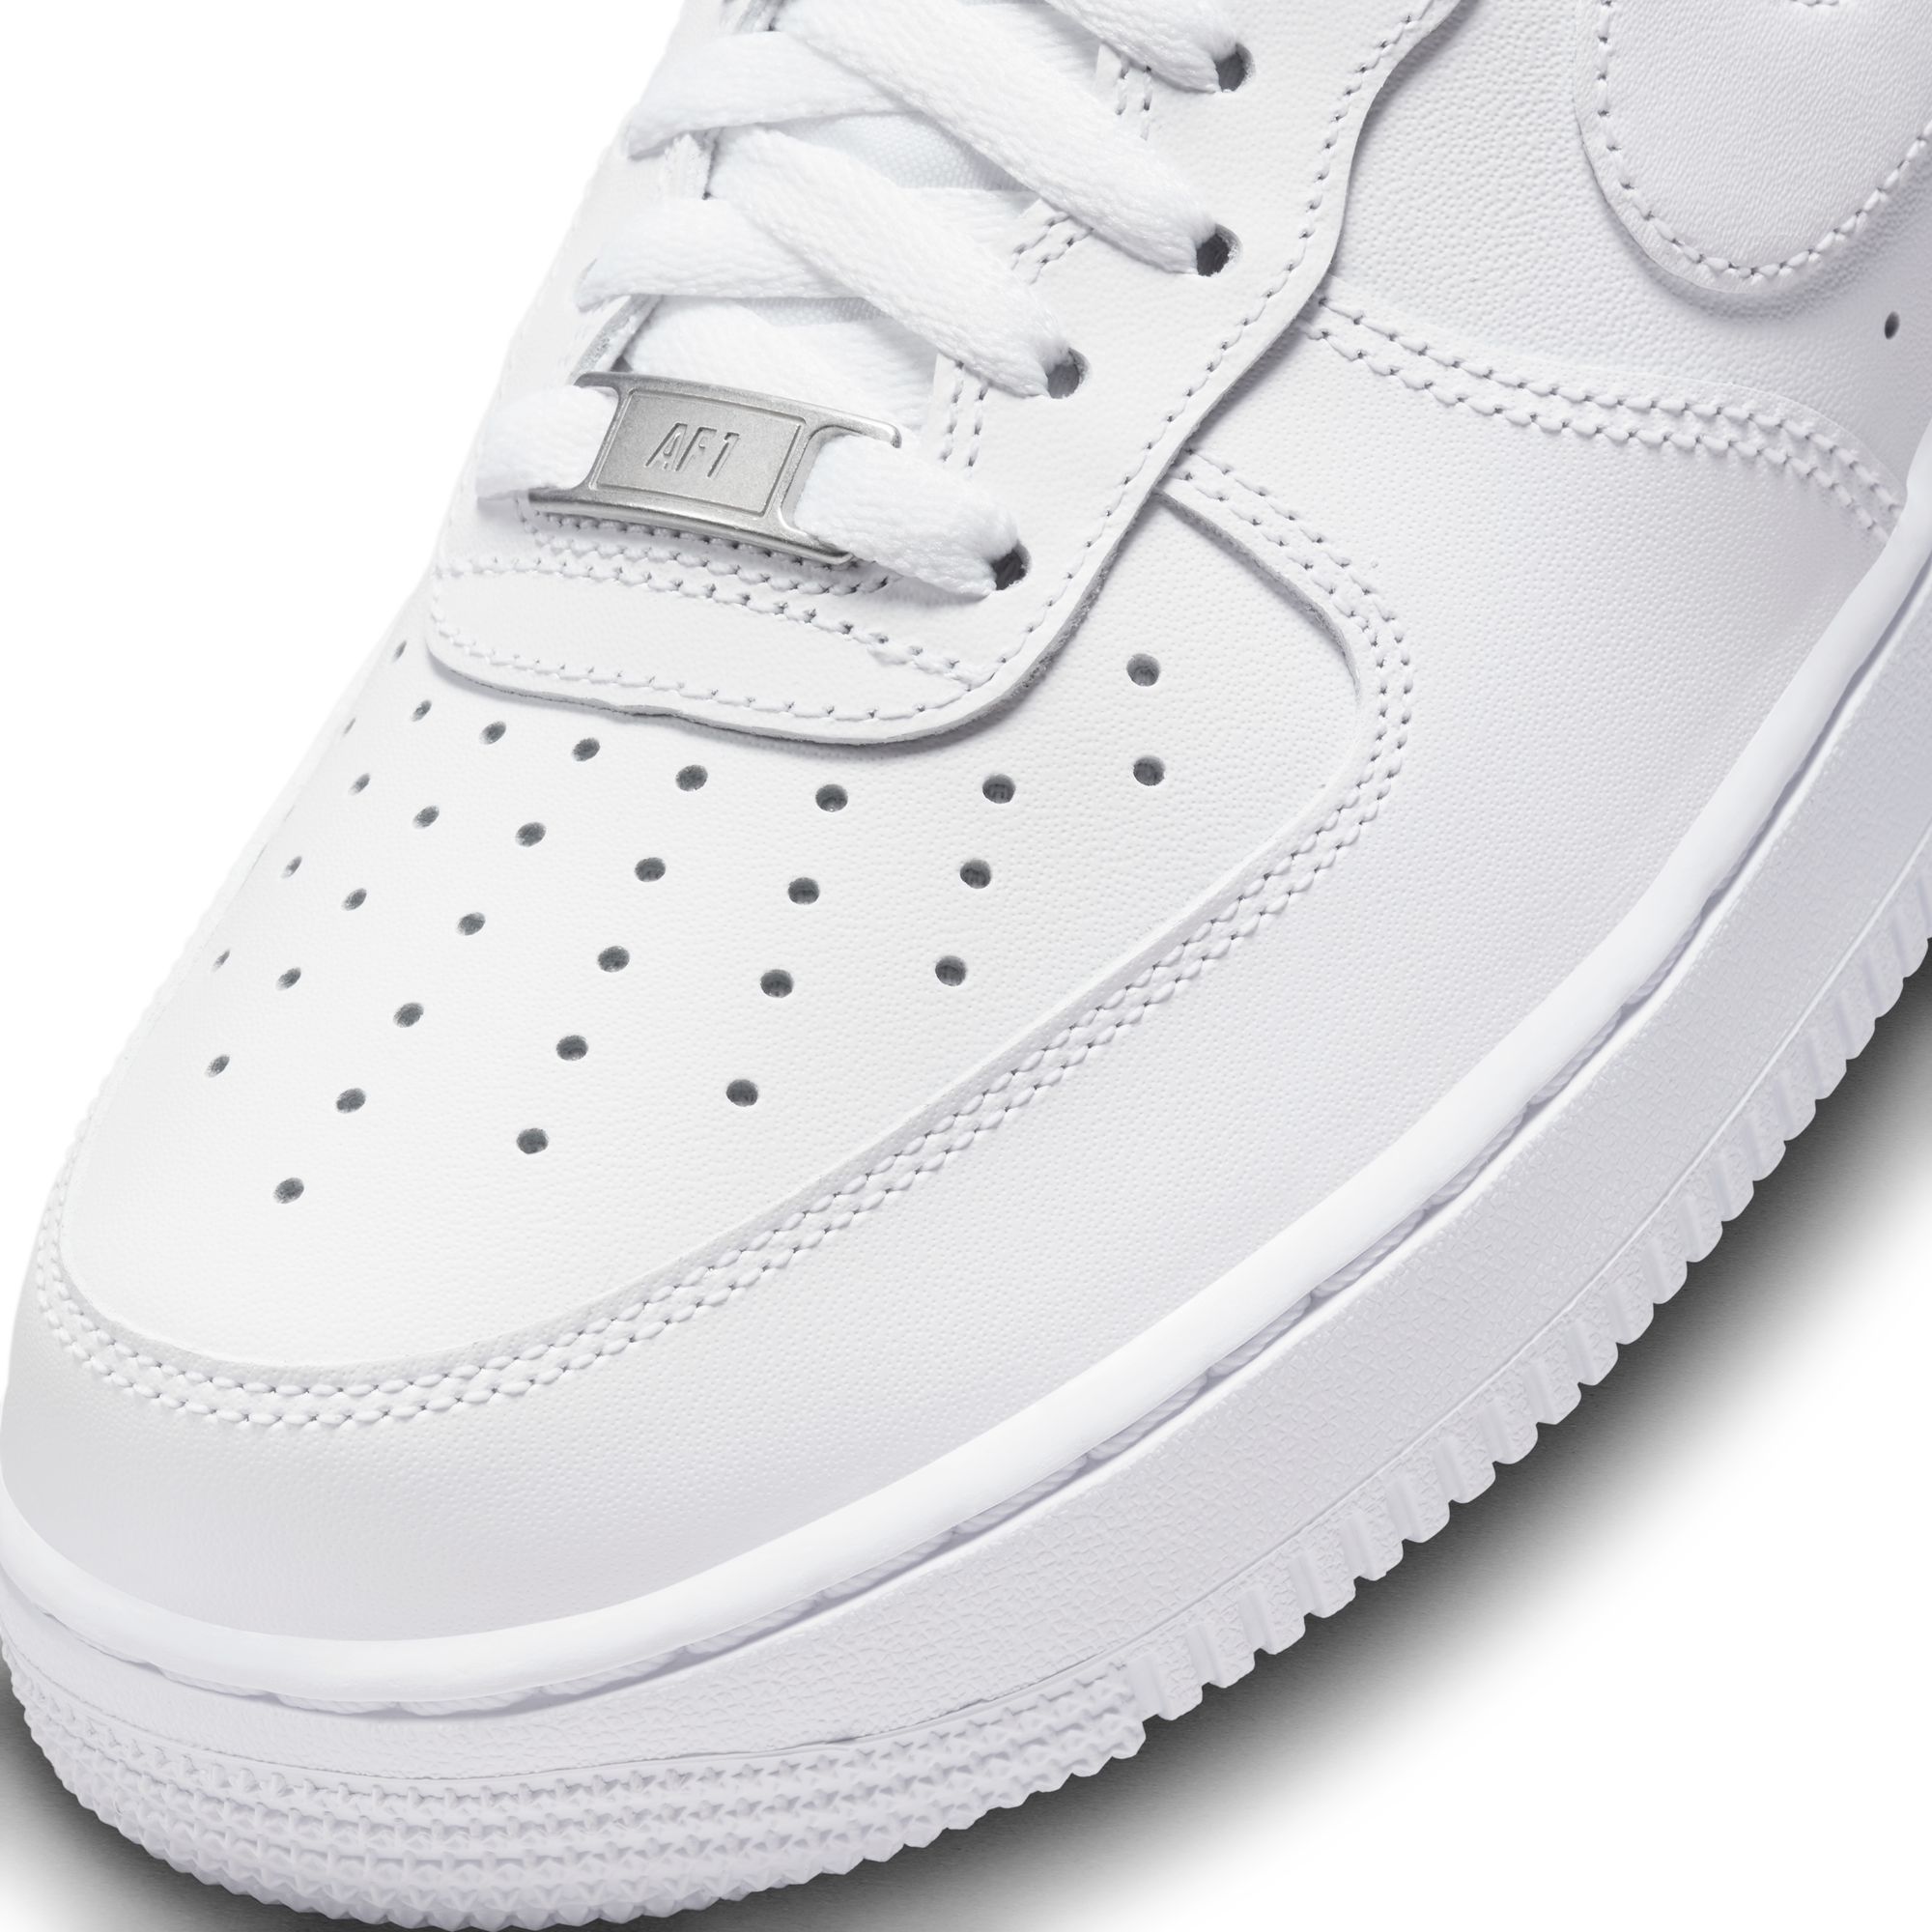 GIÀY THỂ THAO NỮ NIKE AIR FORCE 1 07 EASYON WHITE WOMENS SHOES DX5883-100 2